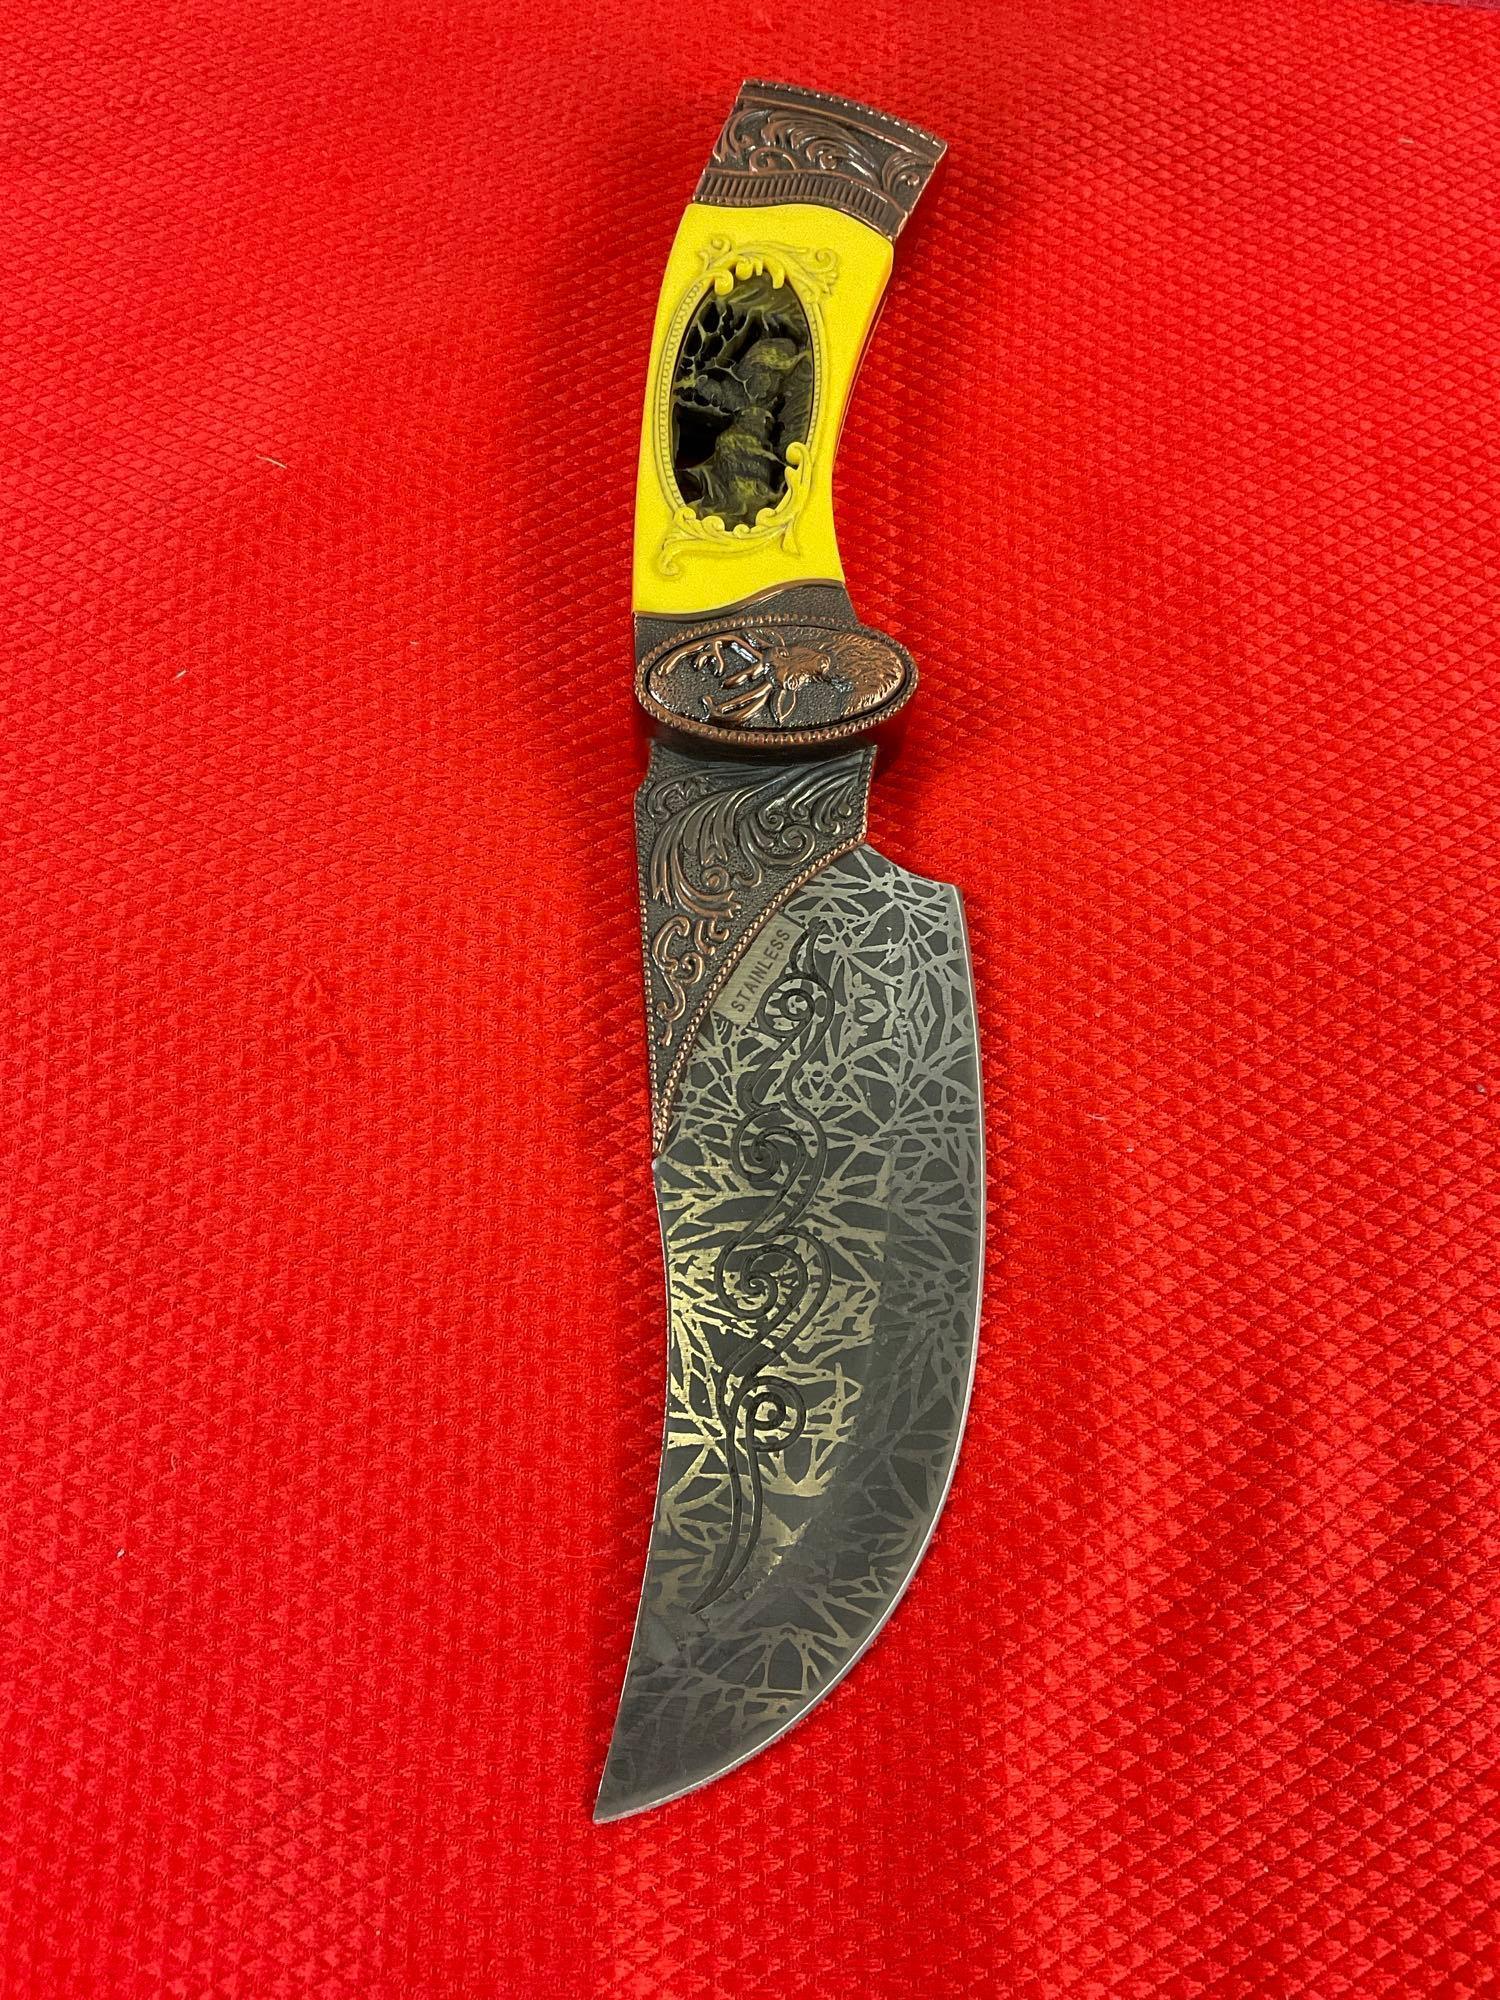 Stainless Steel 5" Fixed Blade Knife w/ Elf Herd Carved Resin Handle & Etched Blade. See pics.